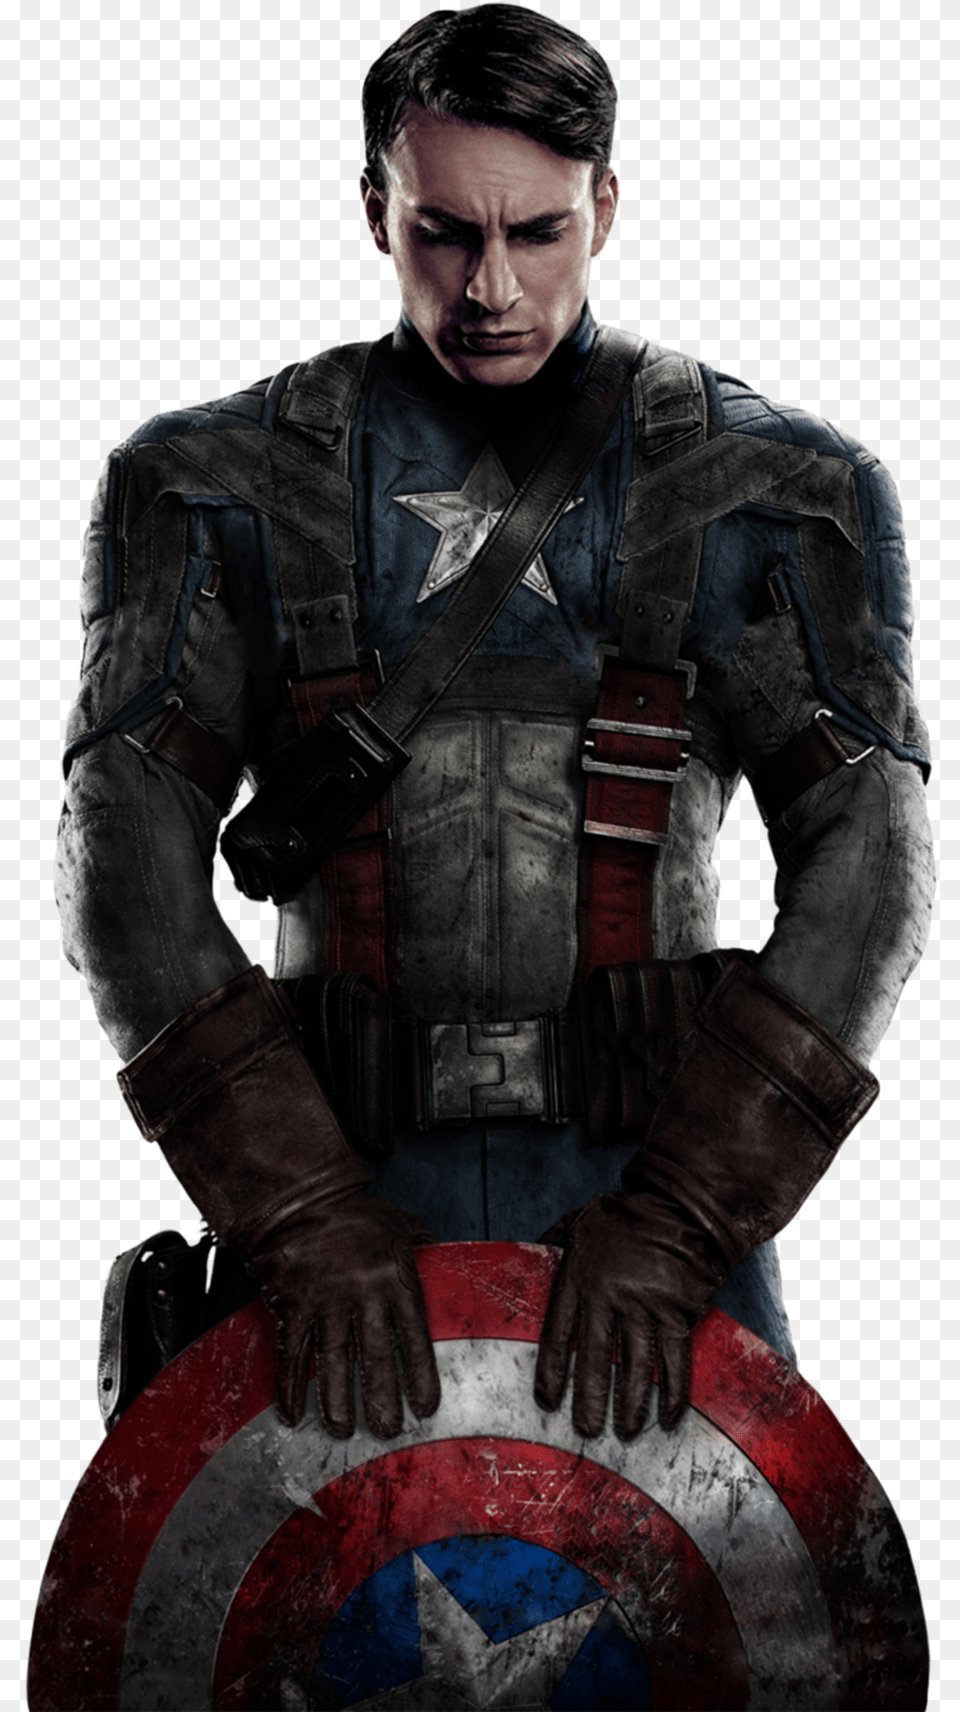 Captain America Hd Wallpaper For Iphone, Glove, Clothing, Coat, Jacket Free Png